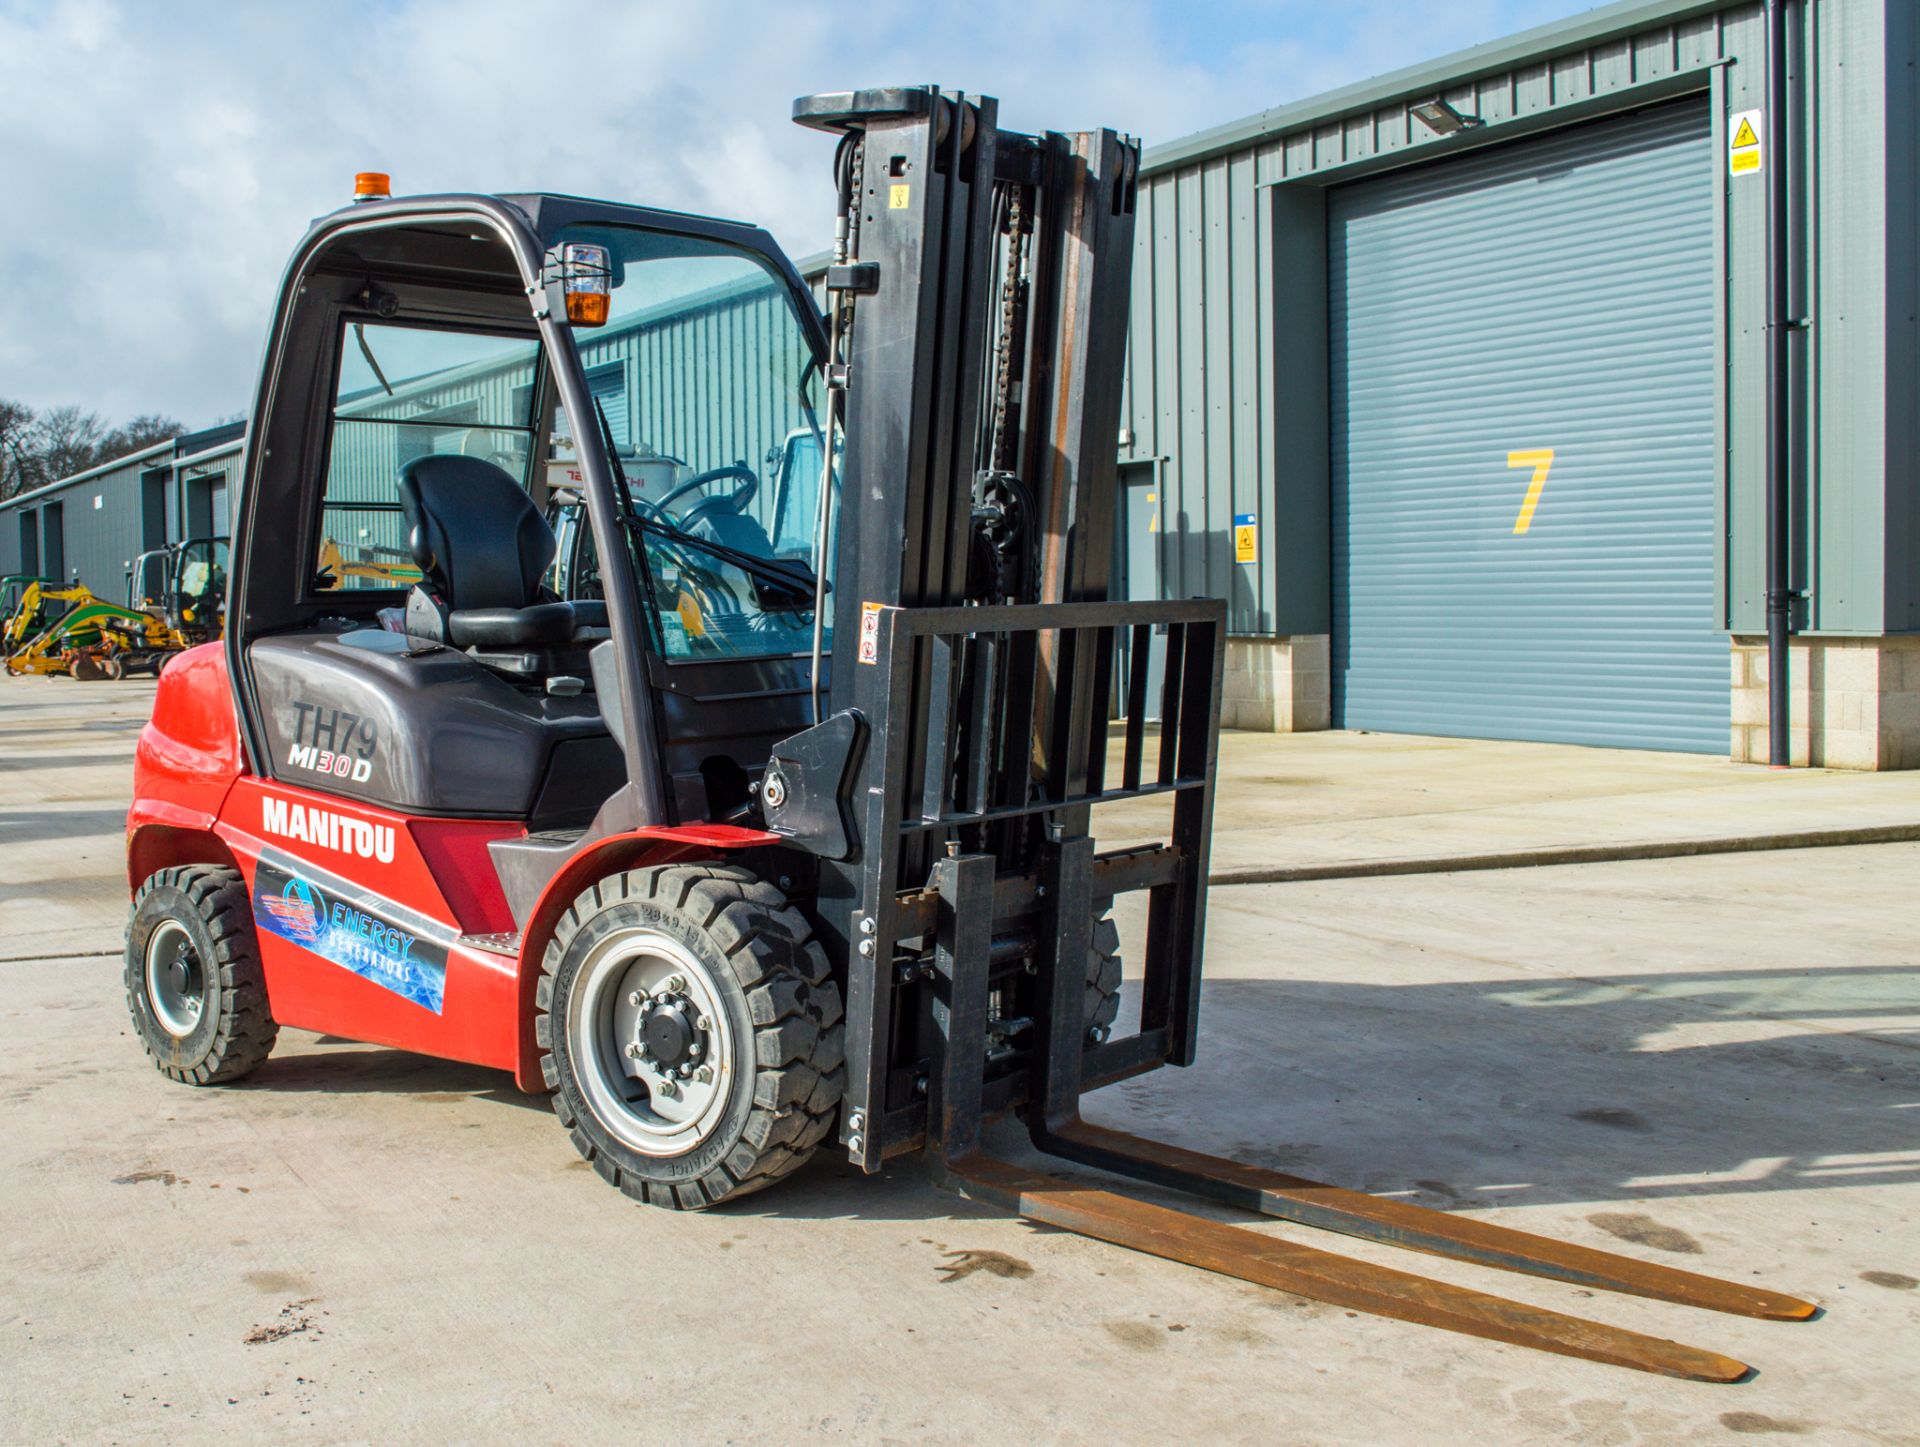 Manitou MI 30D 3 tonne diesel fork lift truck Year: 2020 S/N: 877370 Recorded Hours: 399 TH79 - Image 2 of 14